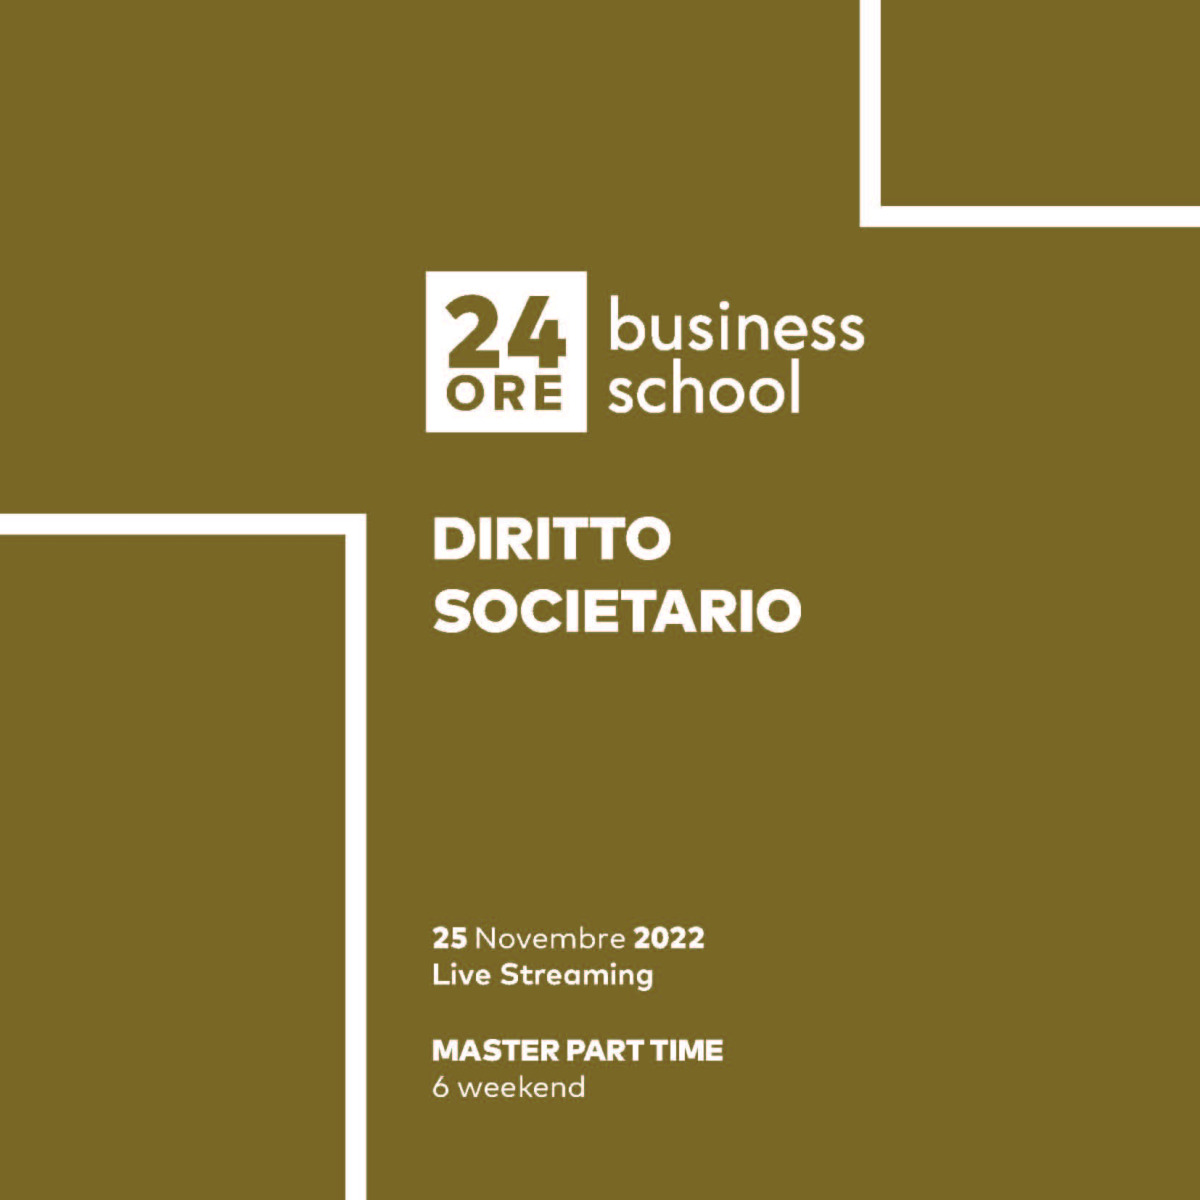 Alessandro Manico attended as lecturer at the "Diritto societario" part-time Master organized by 24ORE Business school